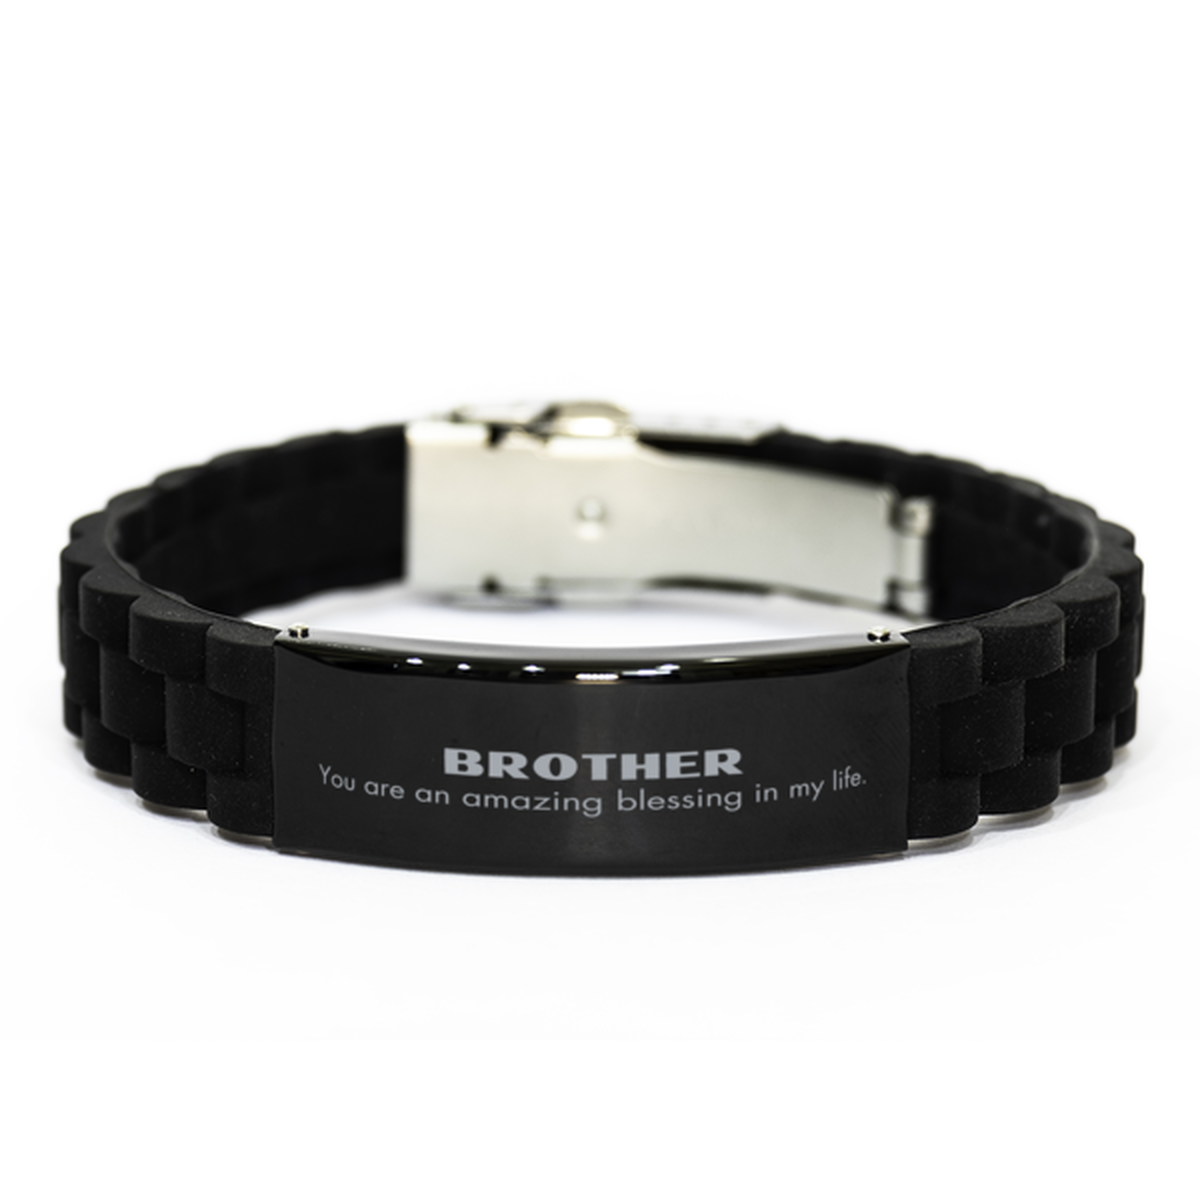 Brother Black Glidelock Clasp Bracelet, You are an amazing blessing in my life, Thank You Gifts For Brother, Inspirational Birthday Christmas Unique Gifts For Brother